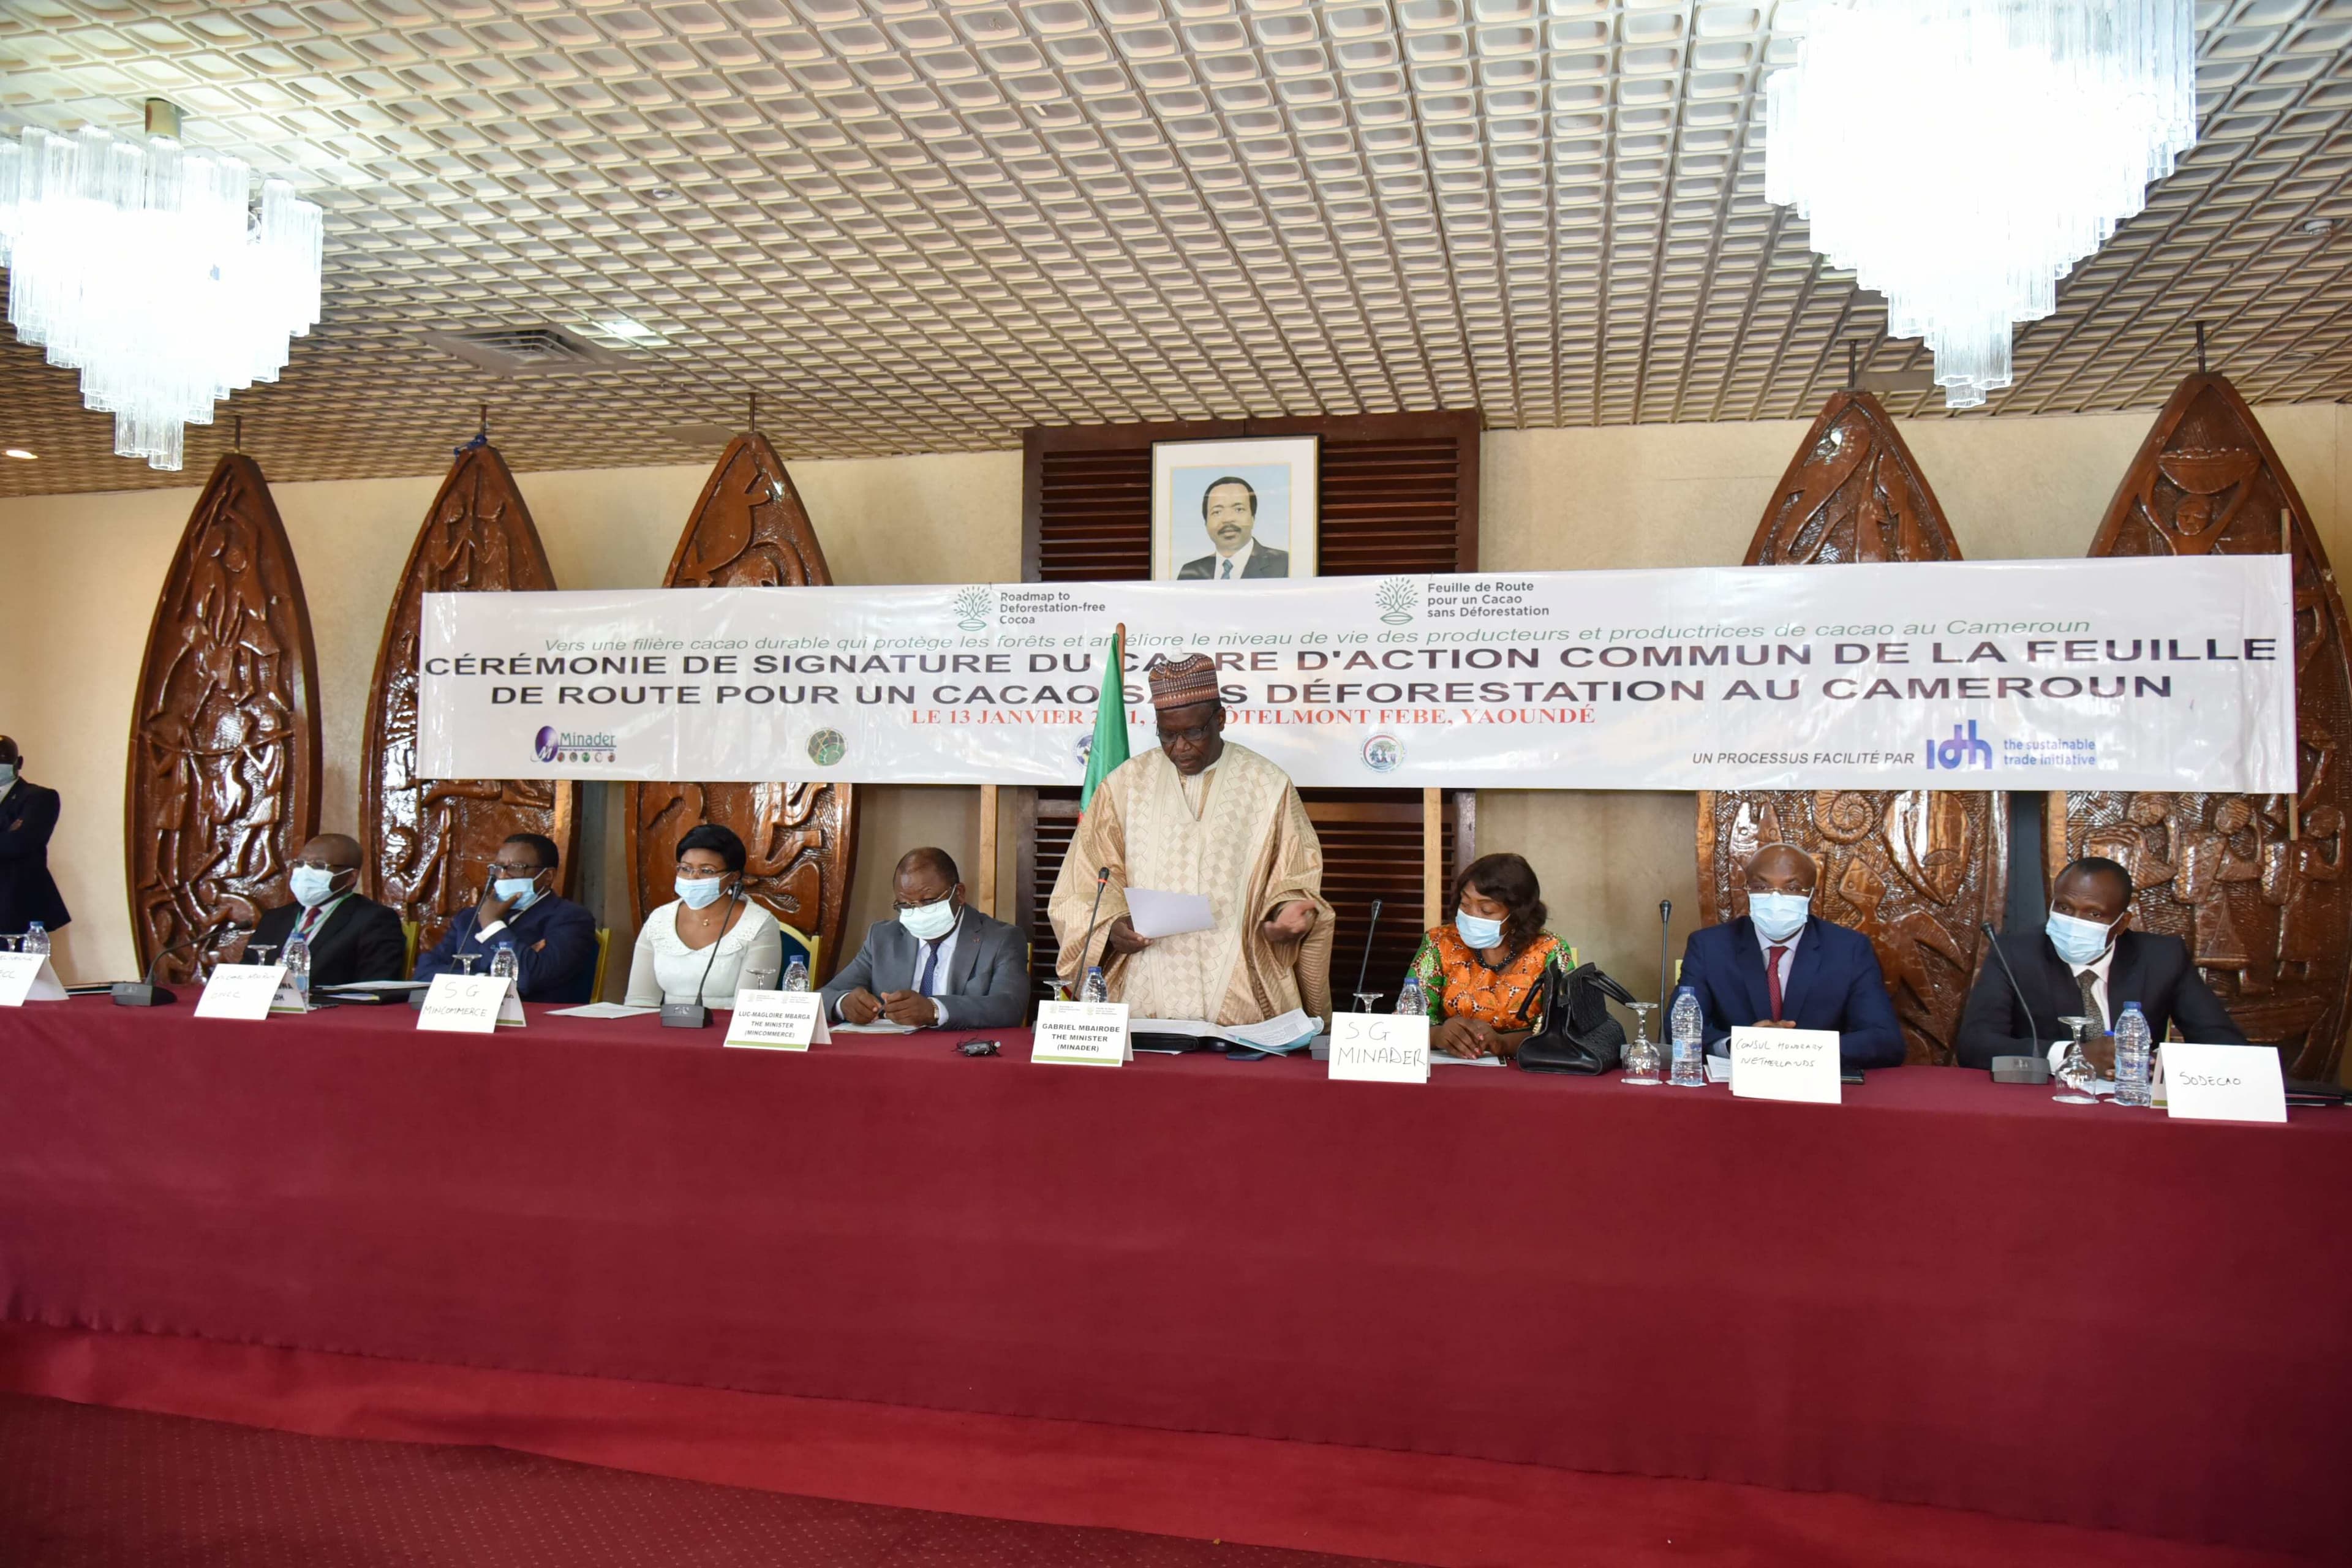 Press Release: Cameroonian cocoa stakeholders sign a Roadmap towards sustainable and deforestation-free cocoa